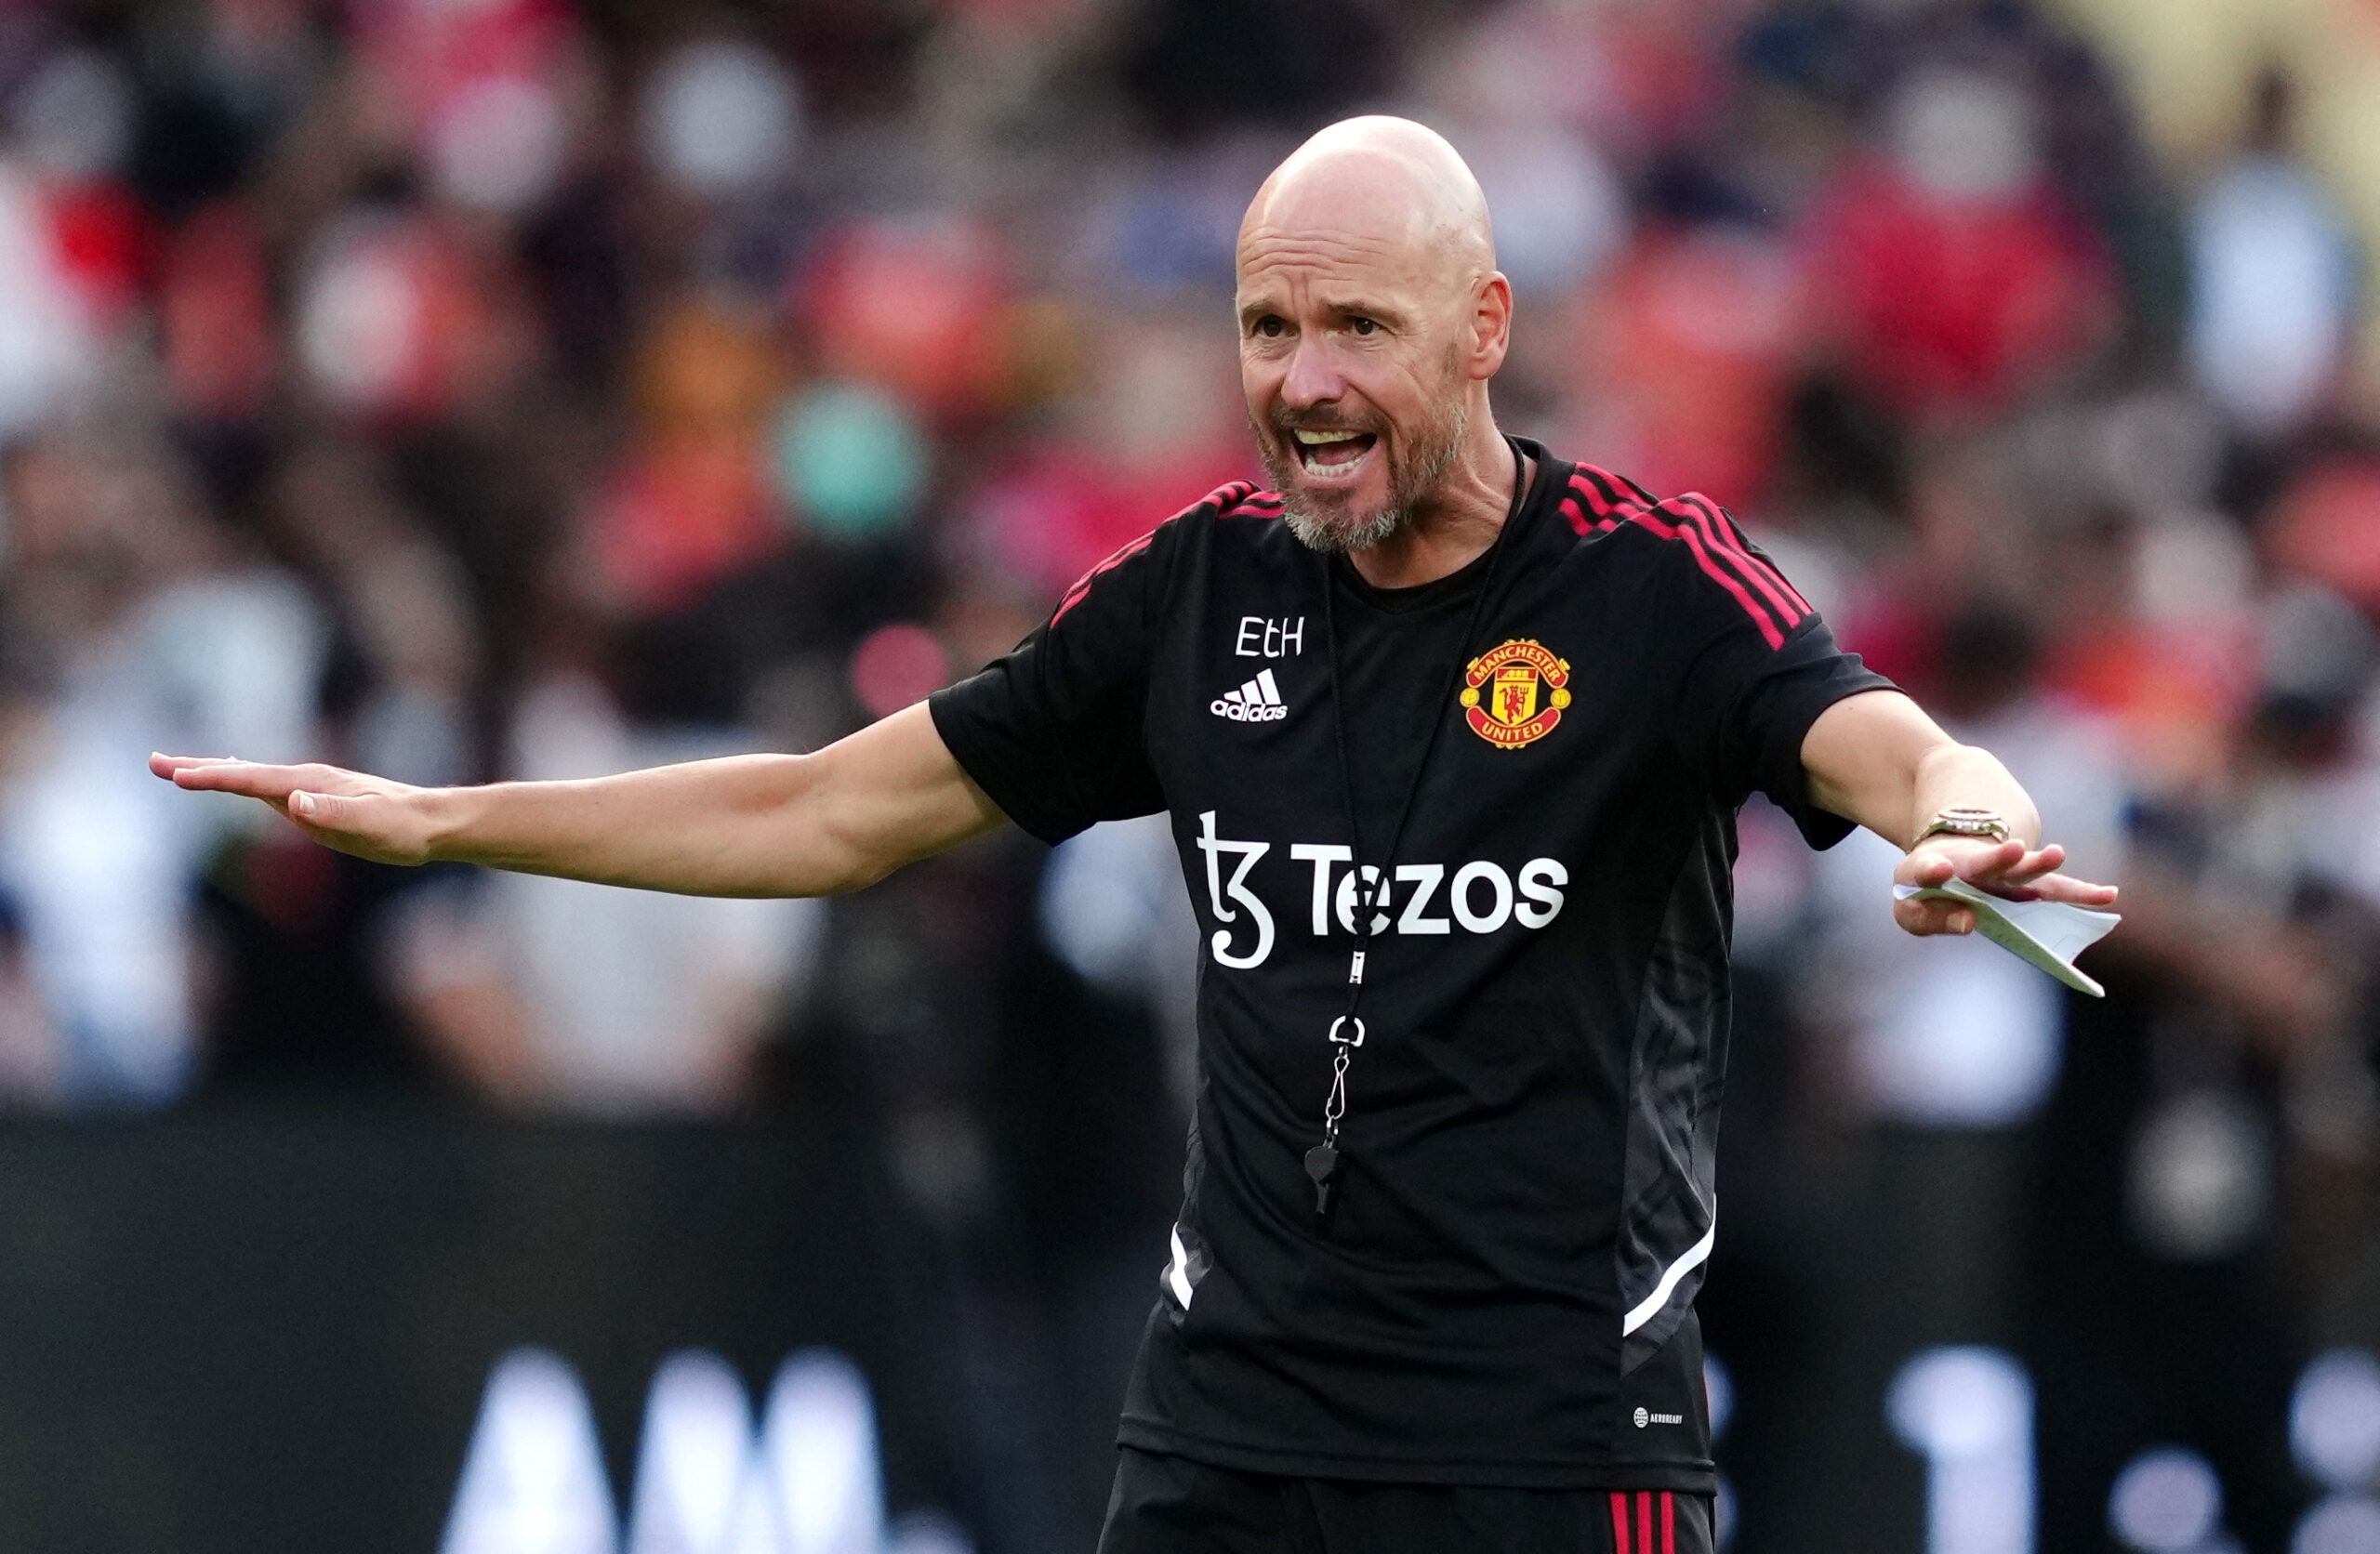 Ten Hag gives out orders.